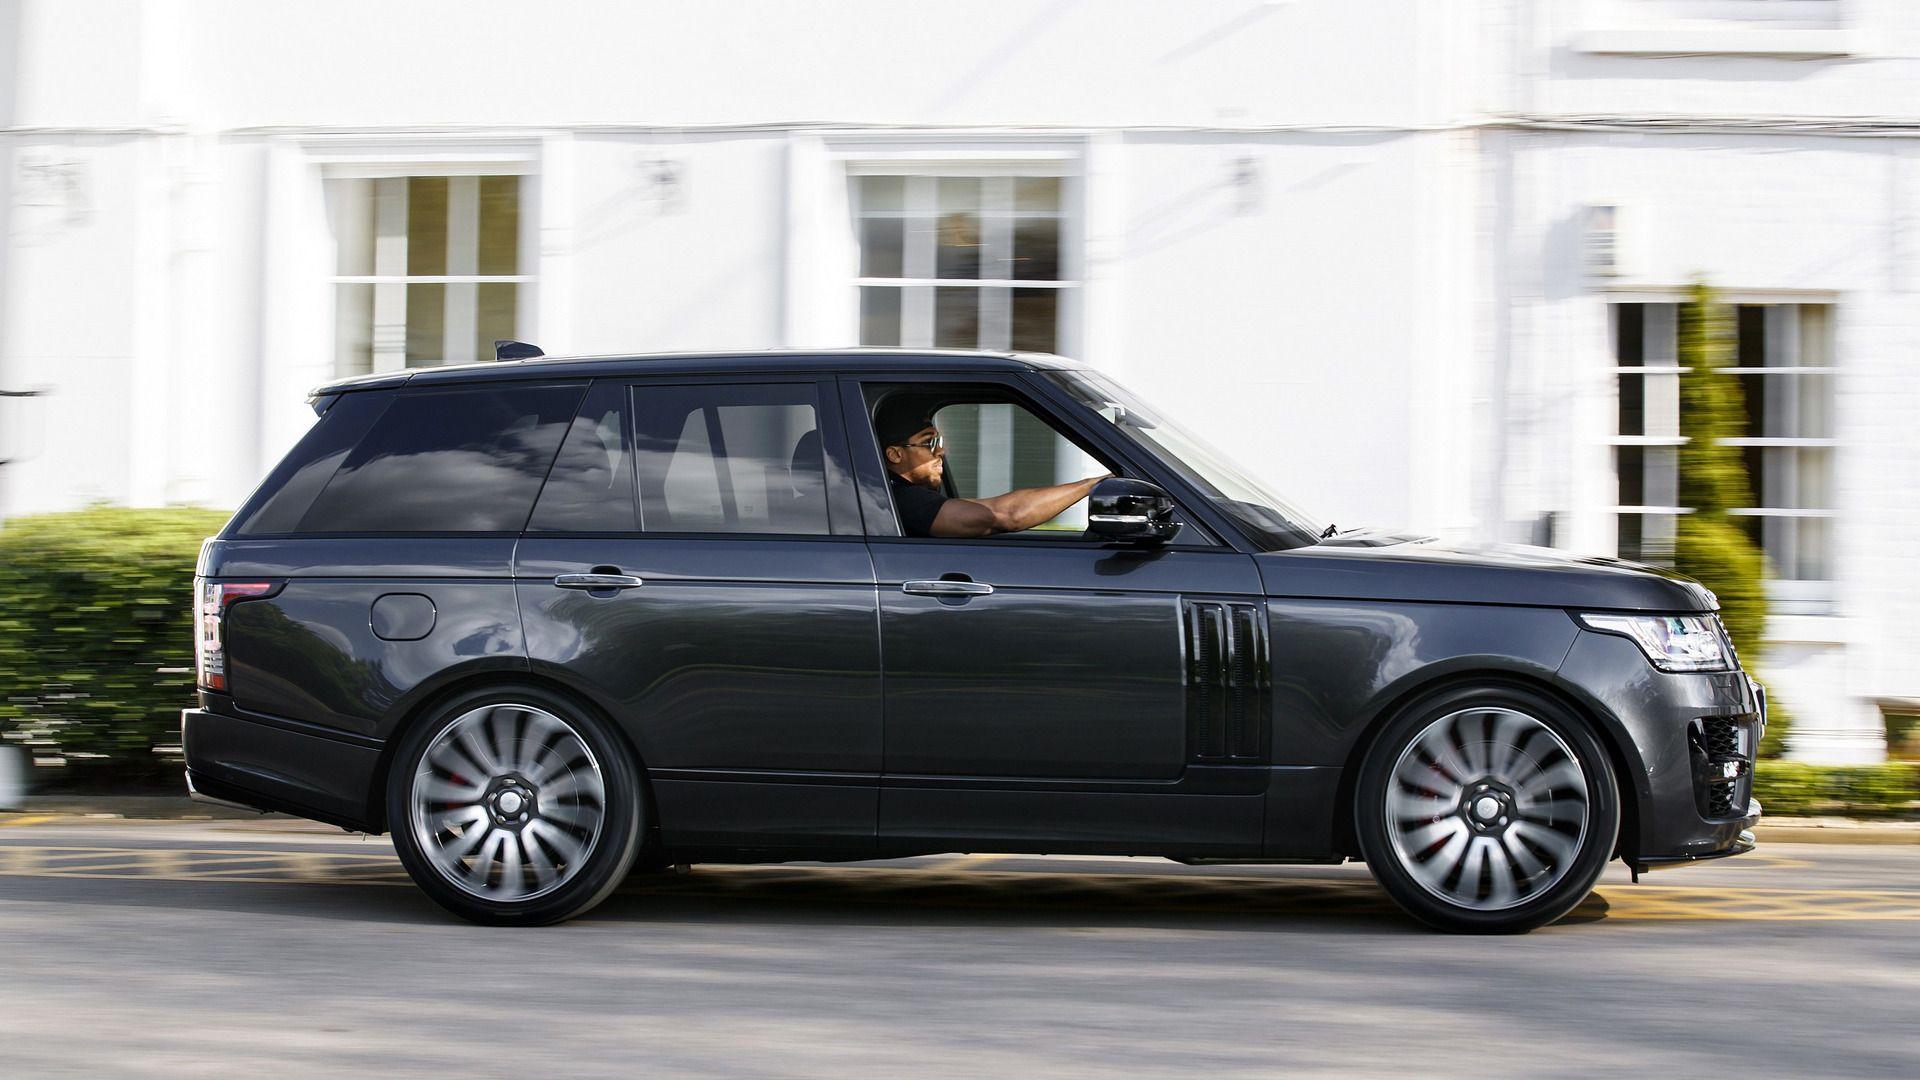 World Boxing Champ Takes Delivery Of Range Rover SV Autobiography